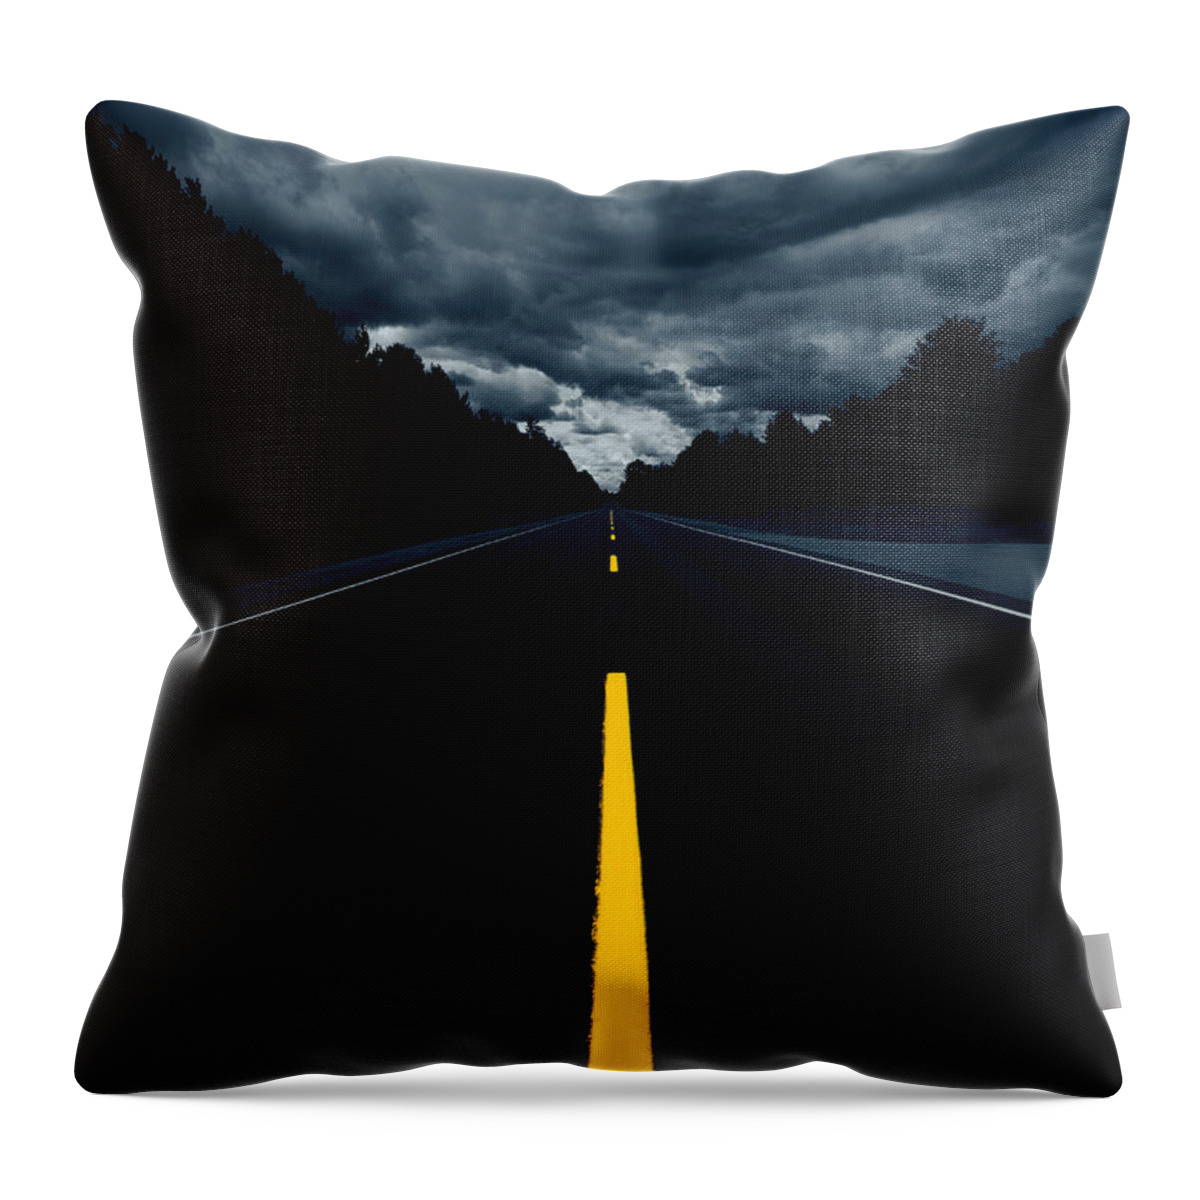 Tranquility Throw Pillow featuring the photograph On The Way To Muskoka by Roland Shainidze Photogaphy